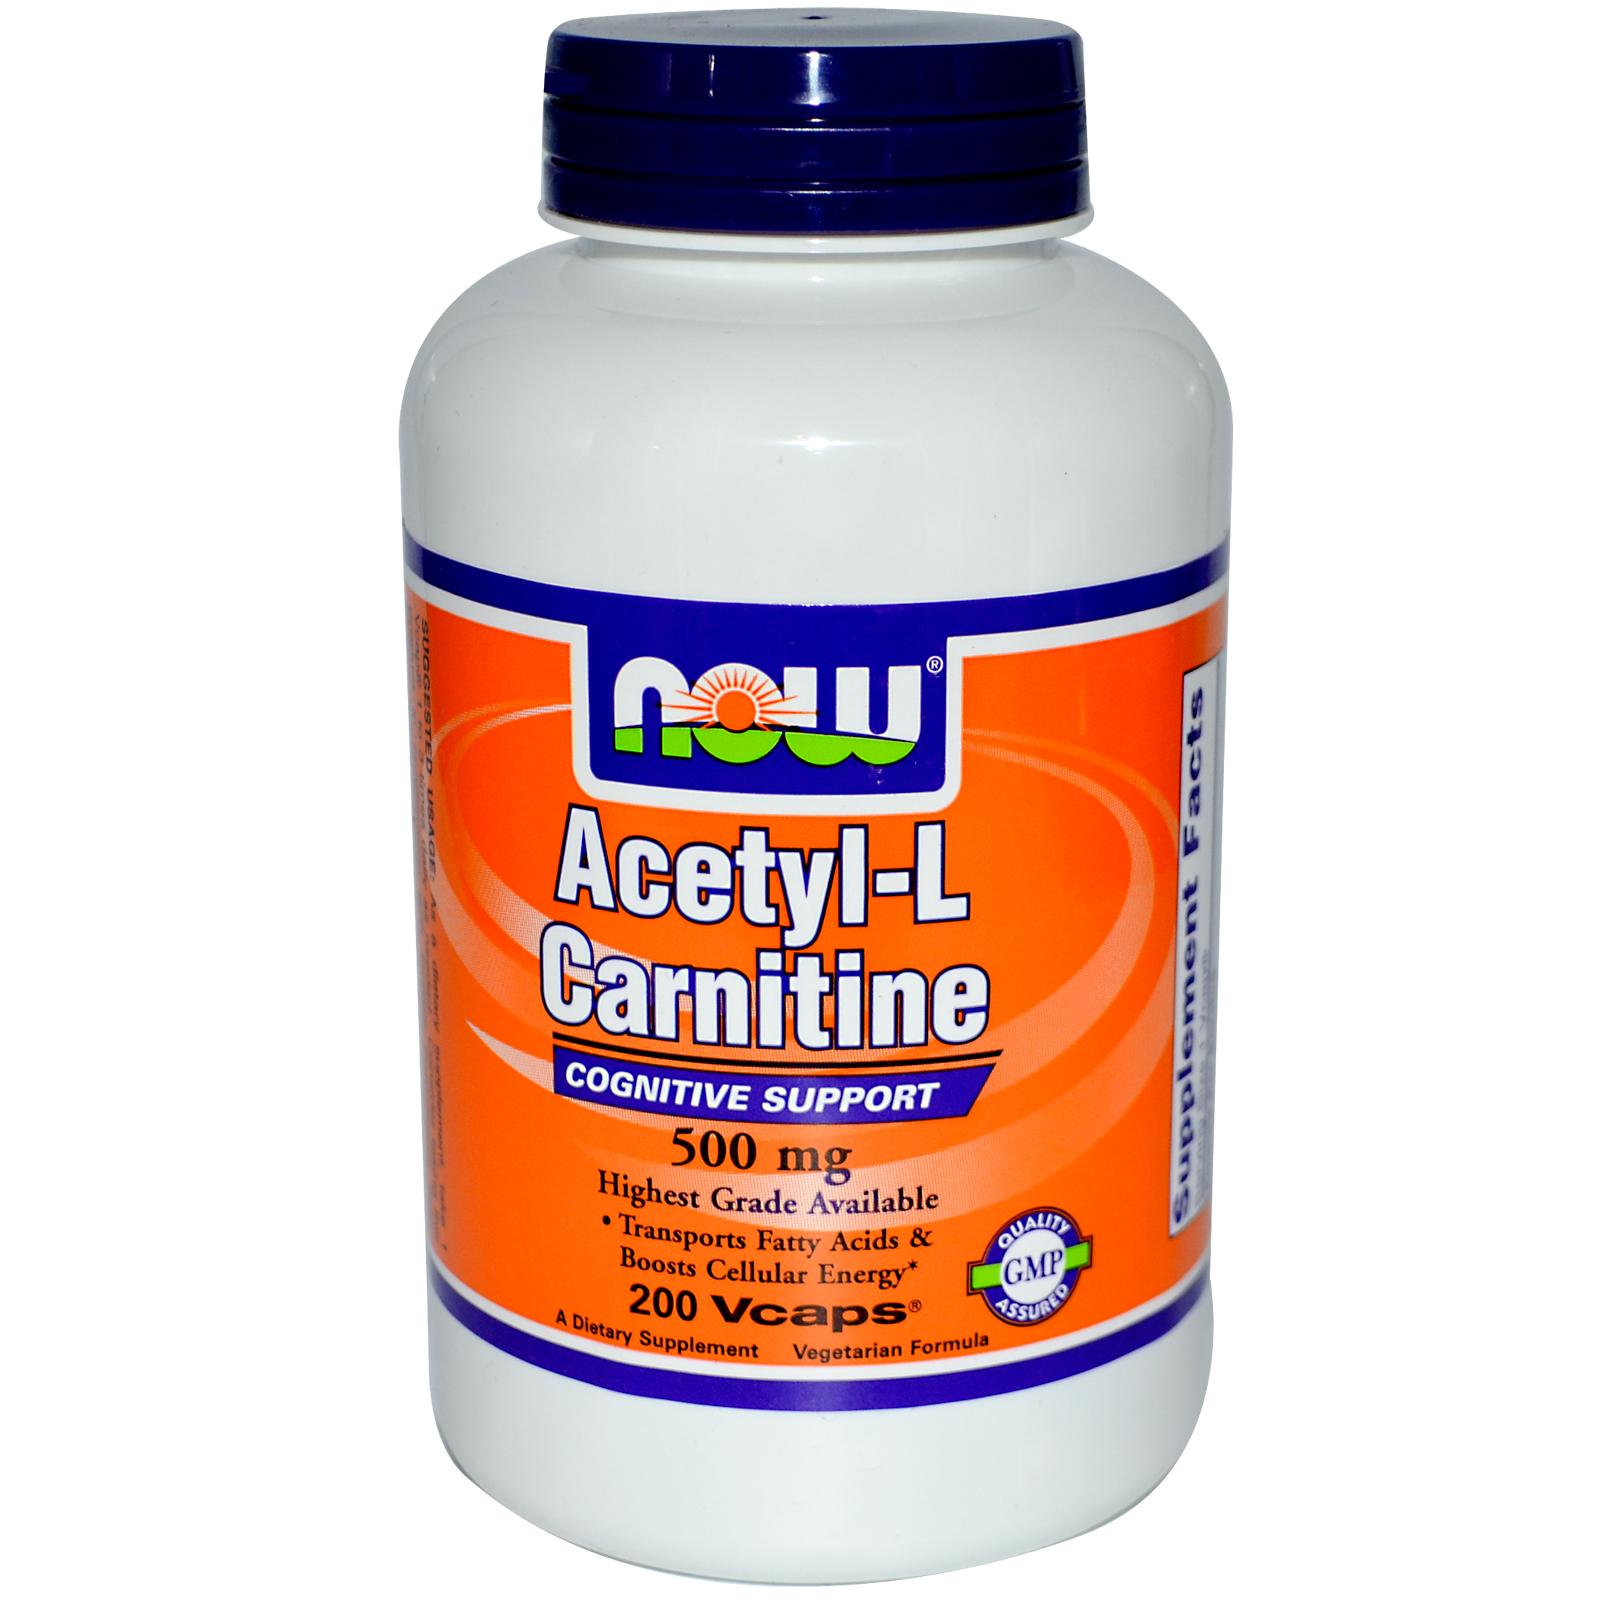 Acetyl-L-Carnitine 500 mg, 200 pcs, Now. L-carnitine. Weight Loss General Health Detoxification Stress resistance Lowering cholesterol Antioxidant properties 